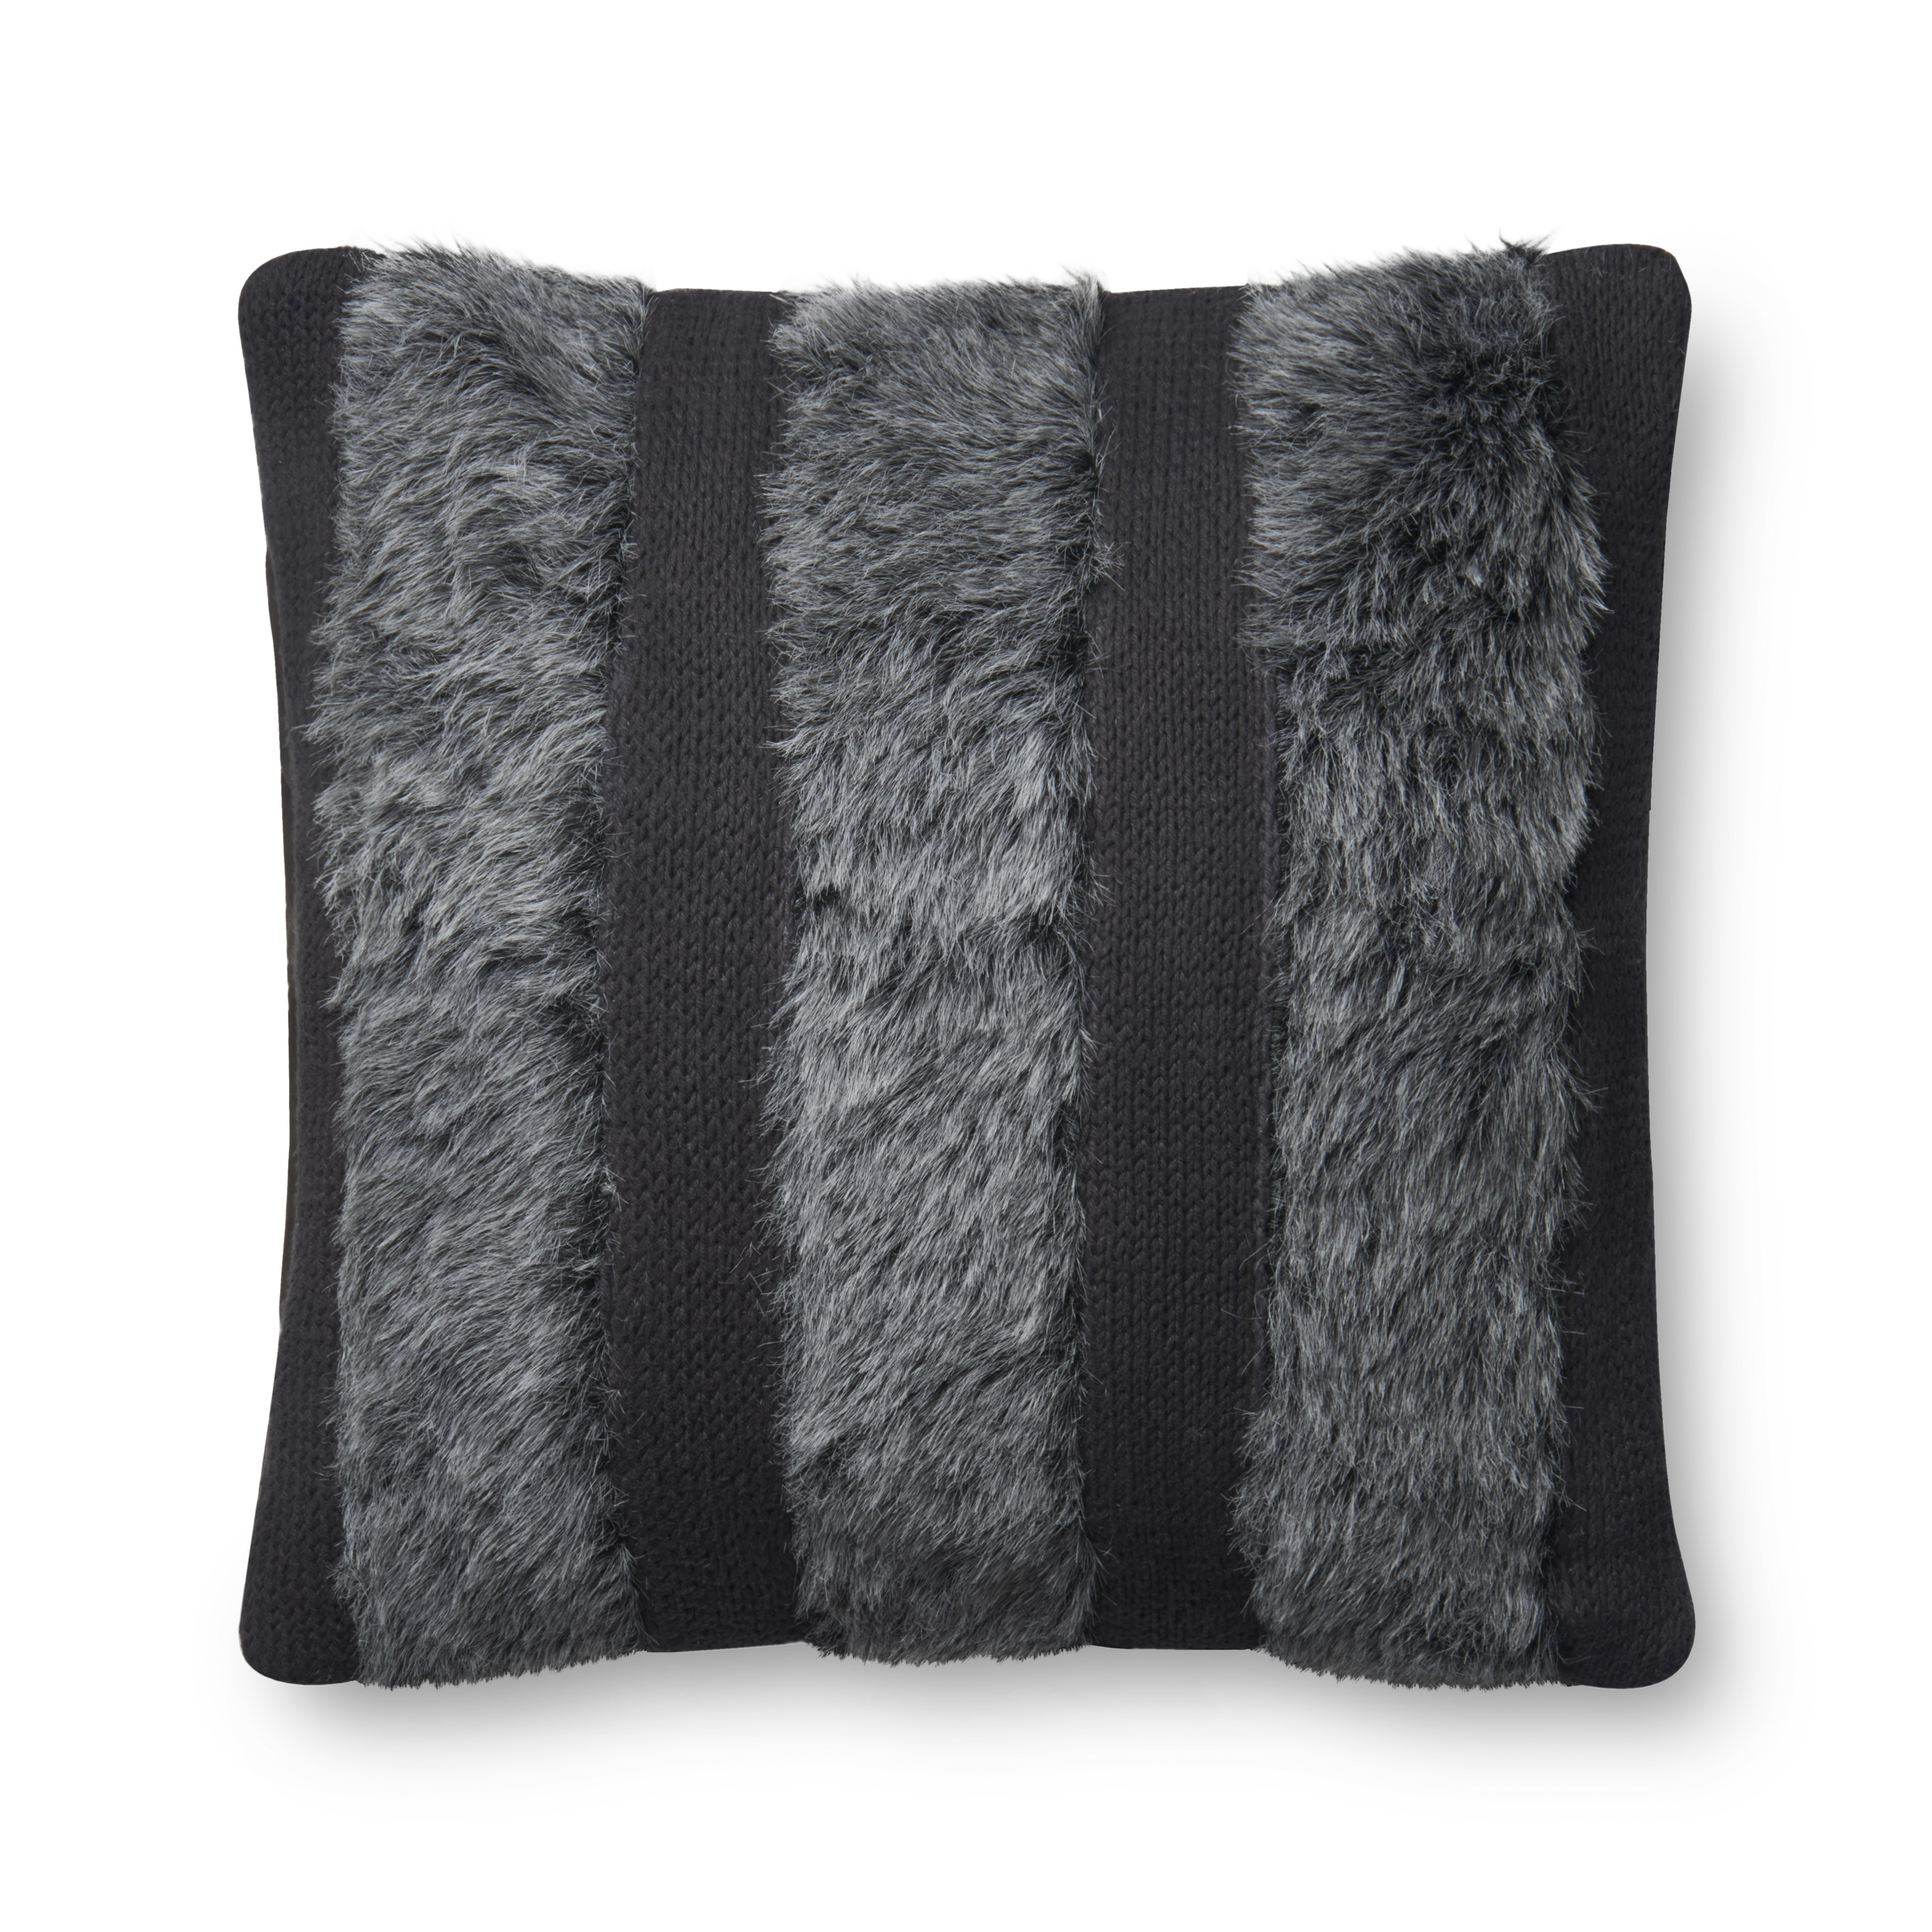 Loloi Pillows P0519 Grey 13" x 21" Cover Only - Image 1